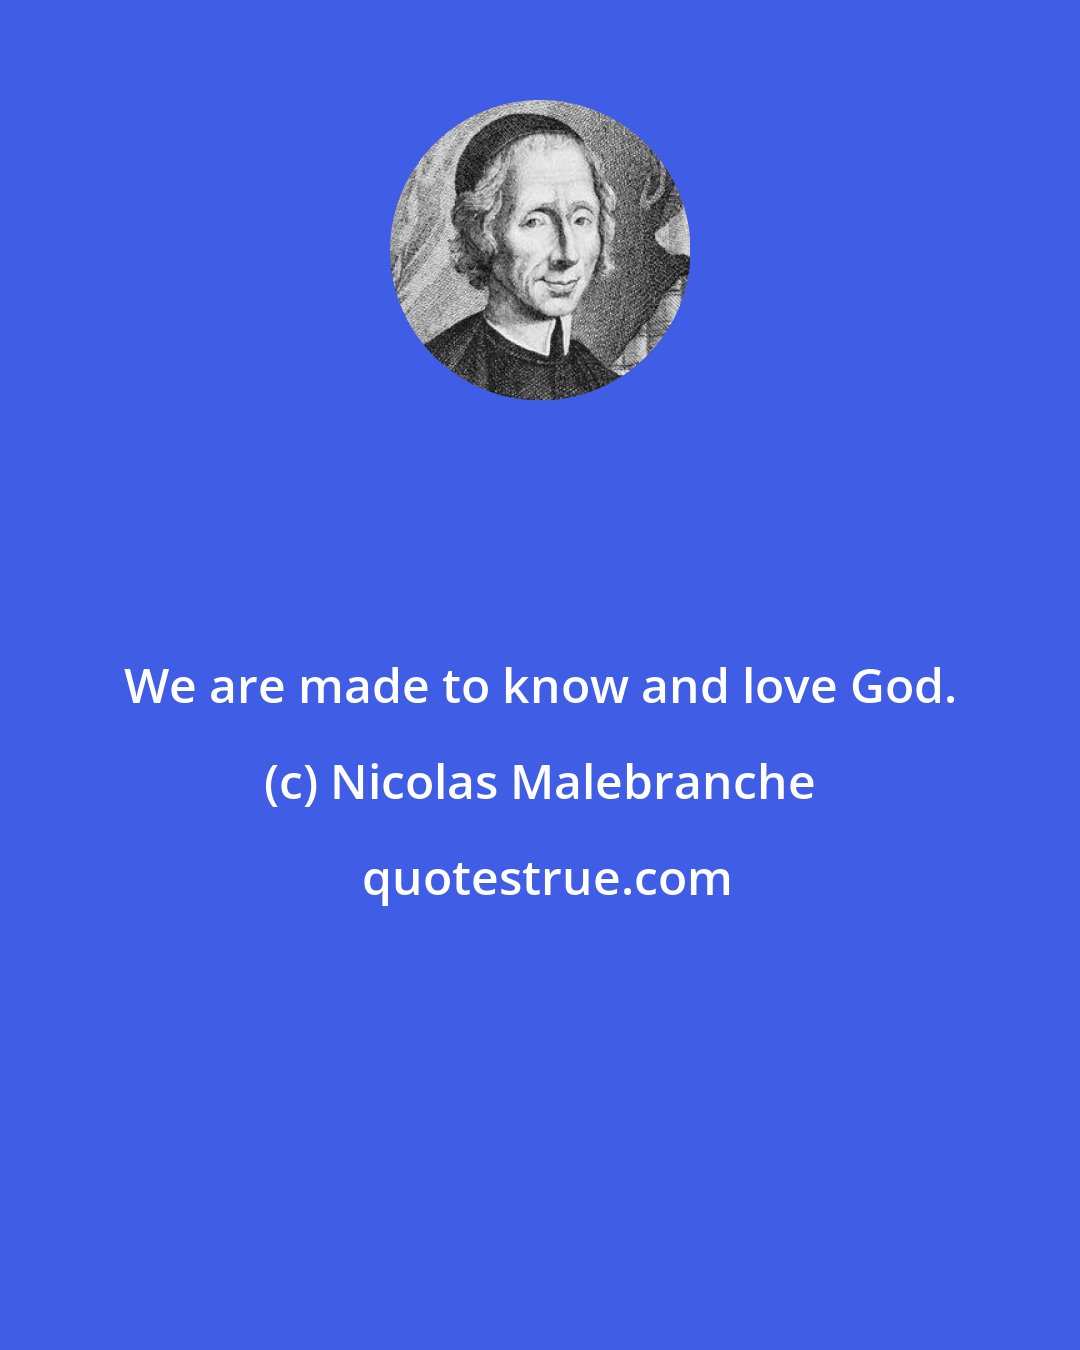 Nicolas Malebranche: We are made to know and love God.